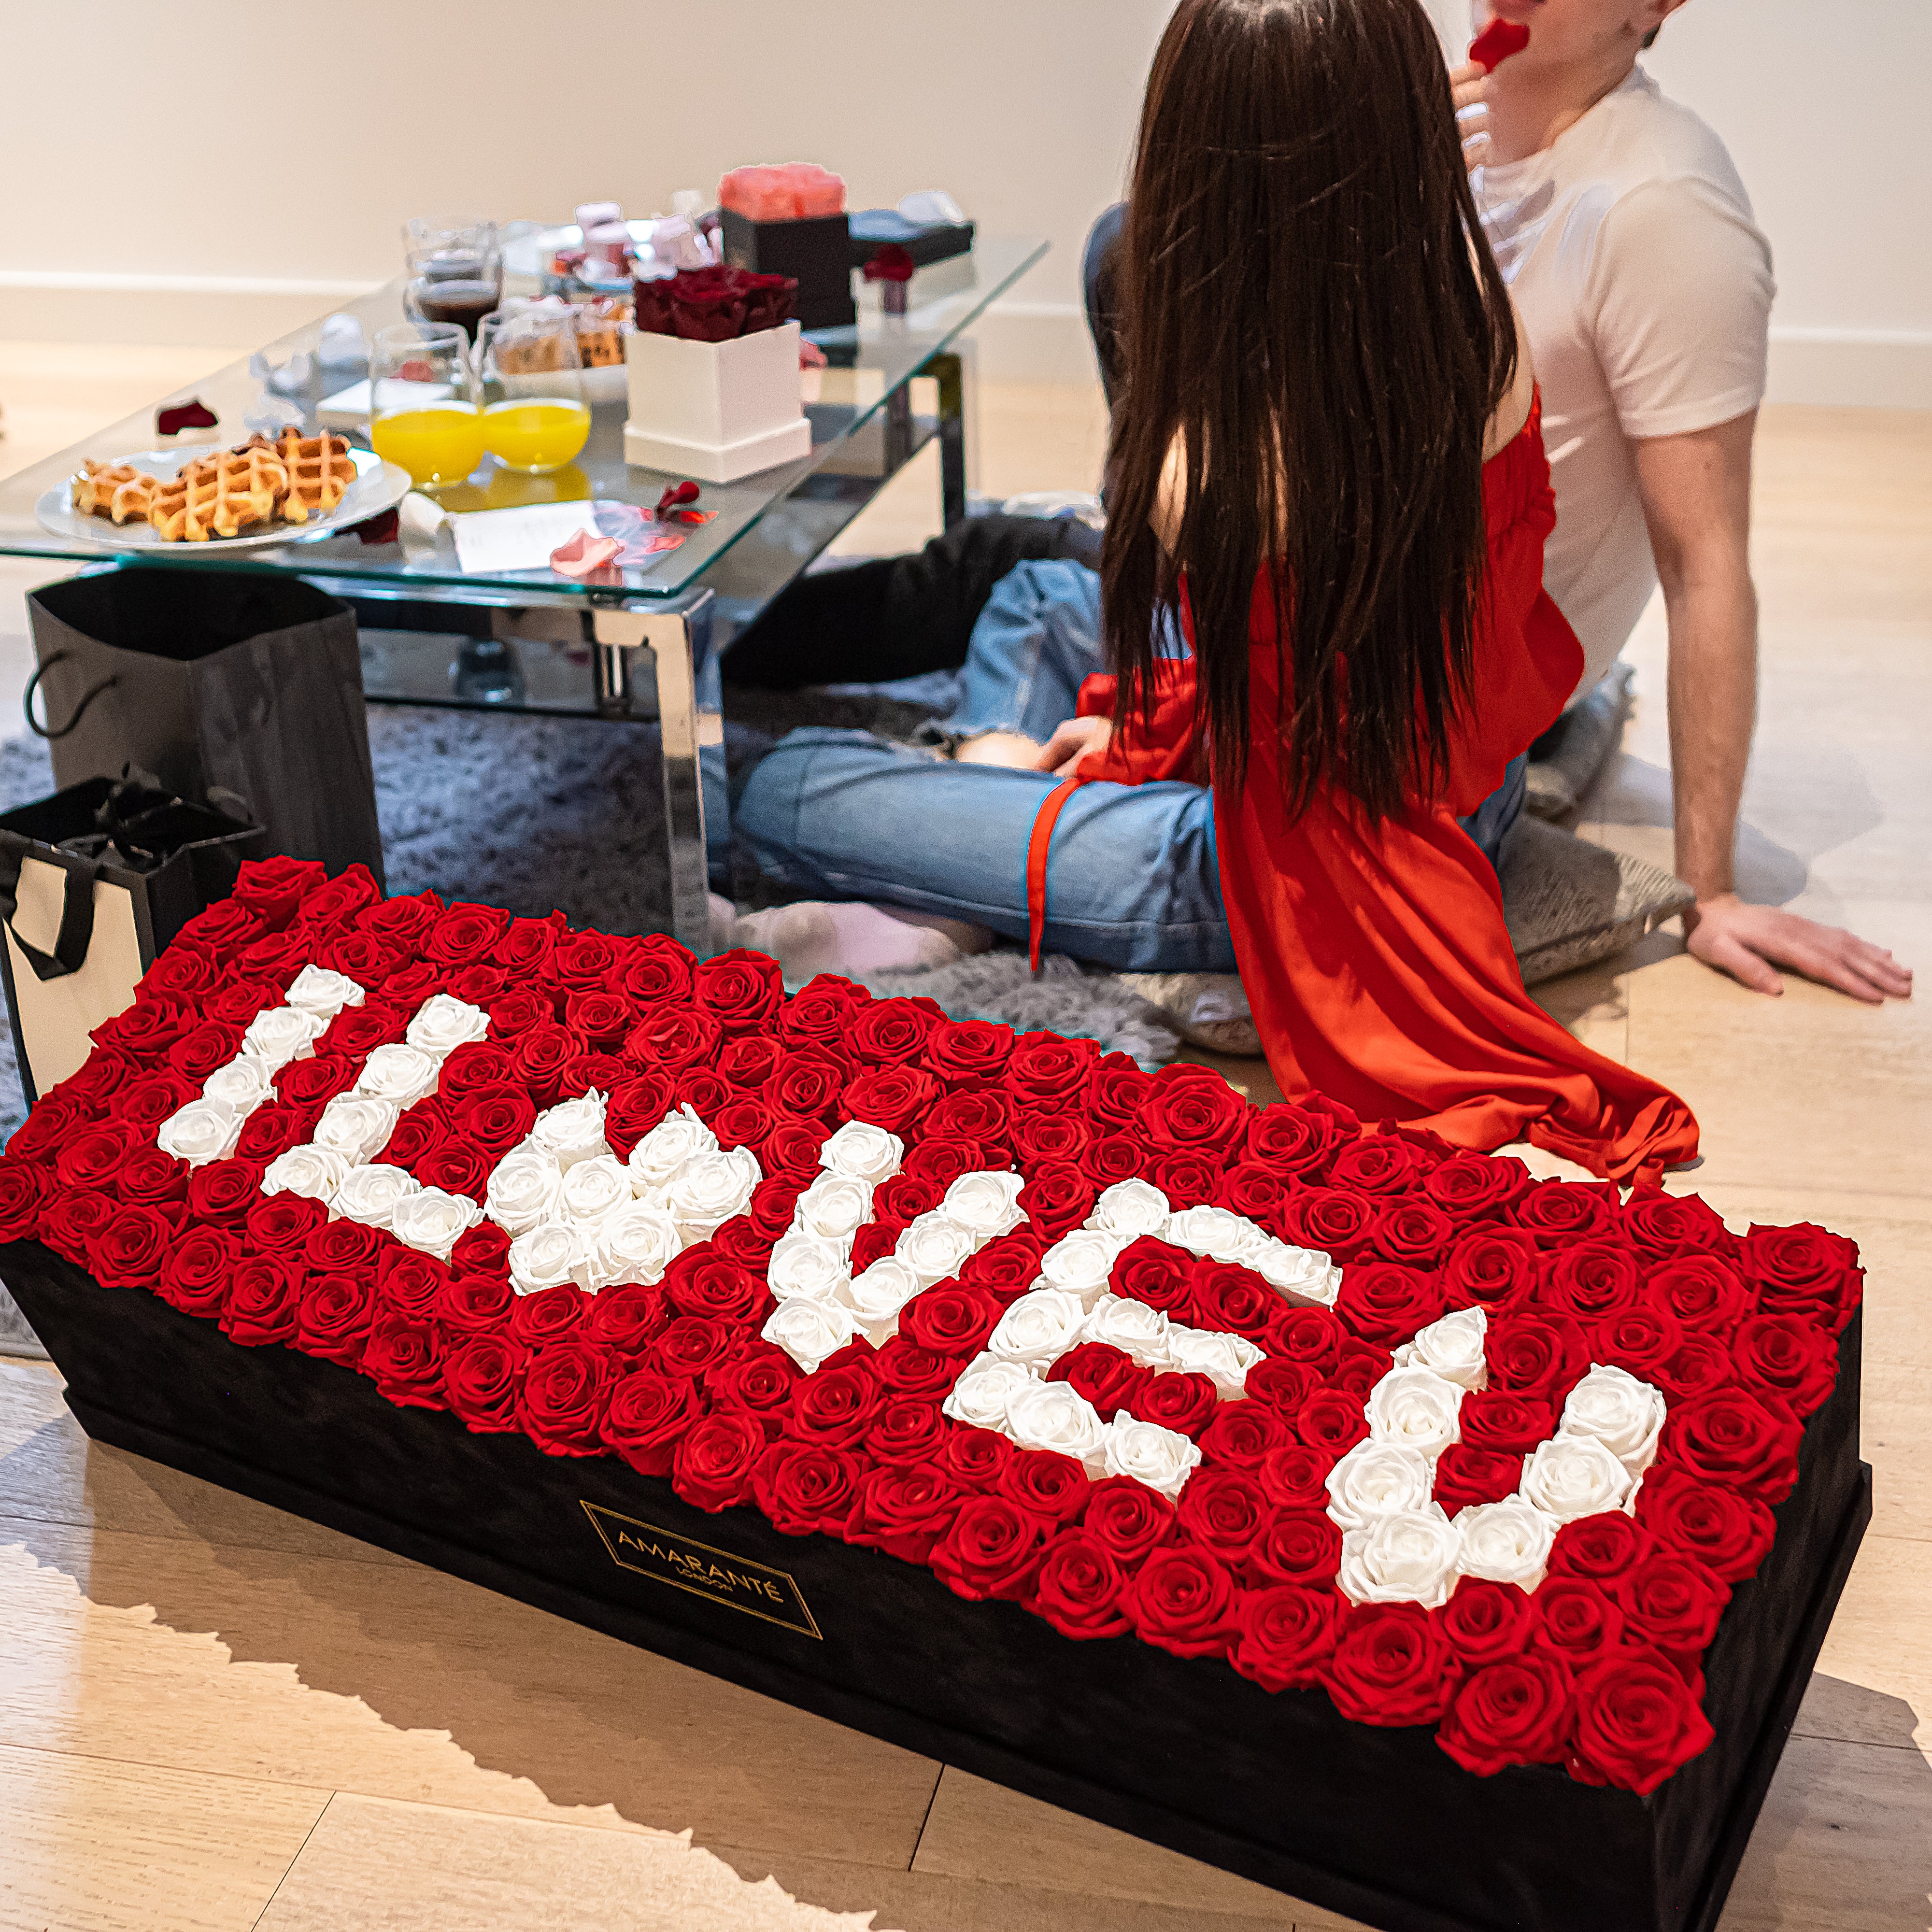 140 Roses For The Ultimate Deluxe Black Suede Rose Box